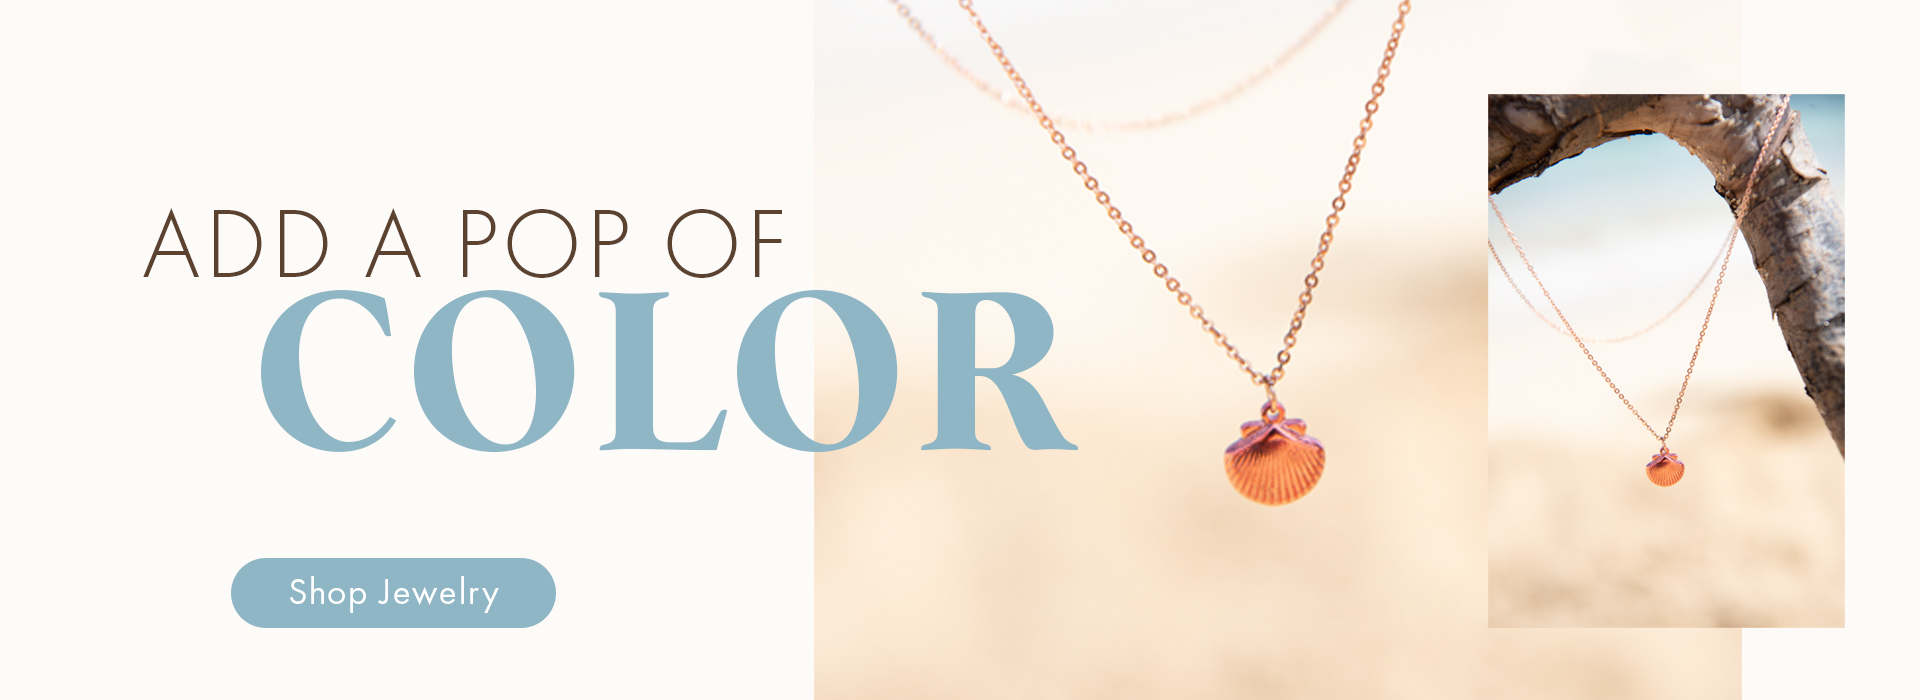 Add a pop of color. Shop Jewelry